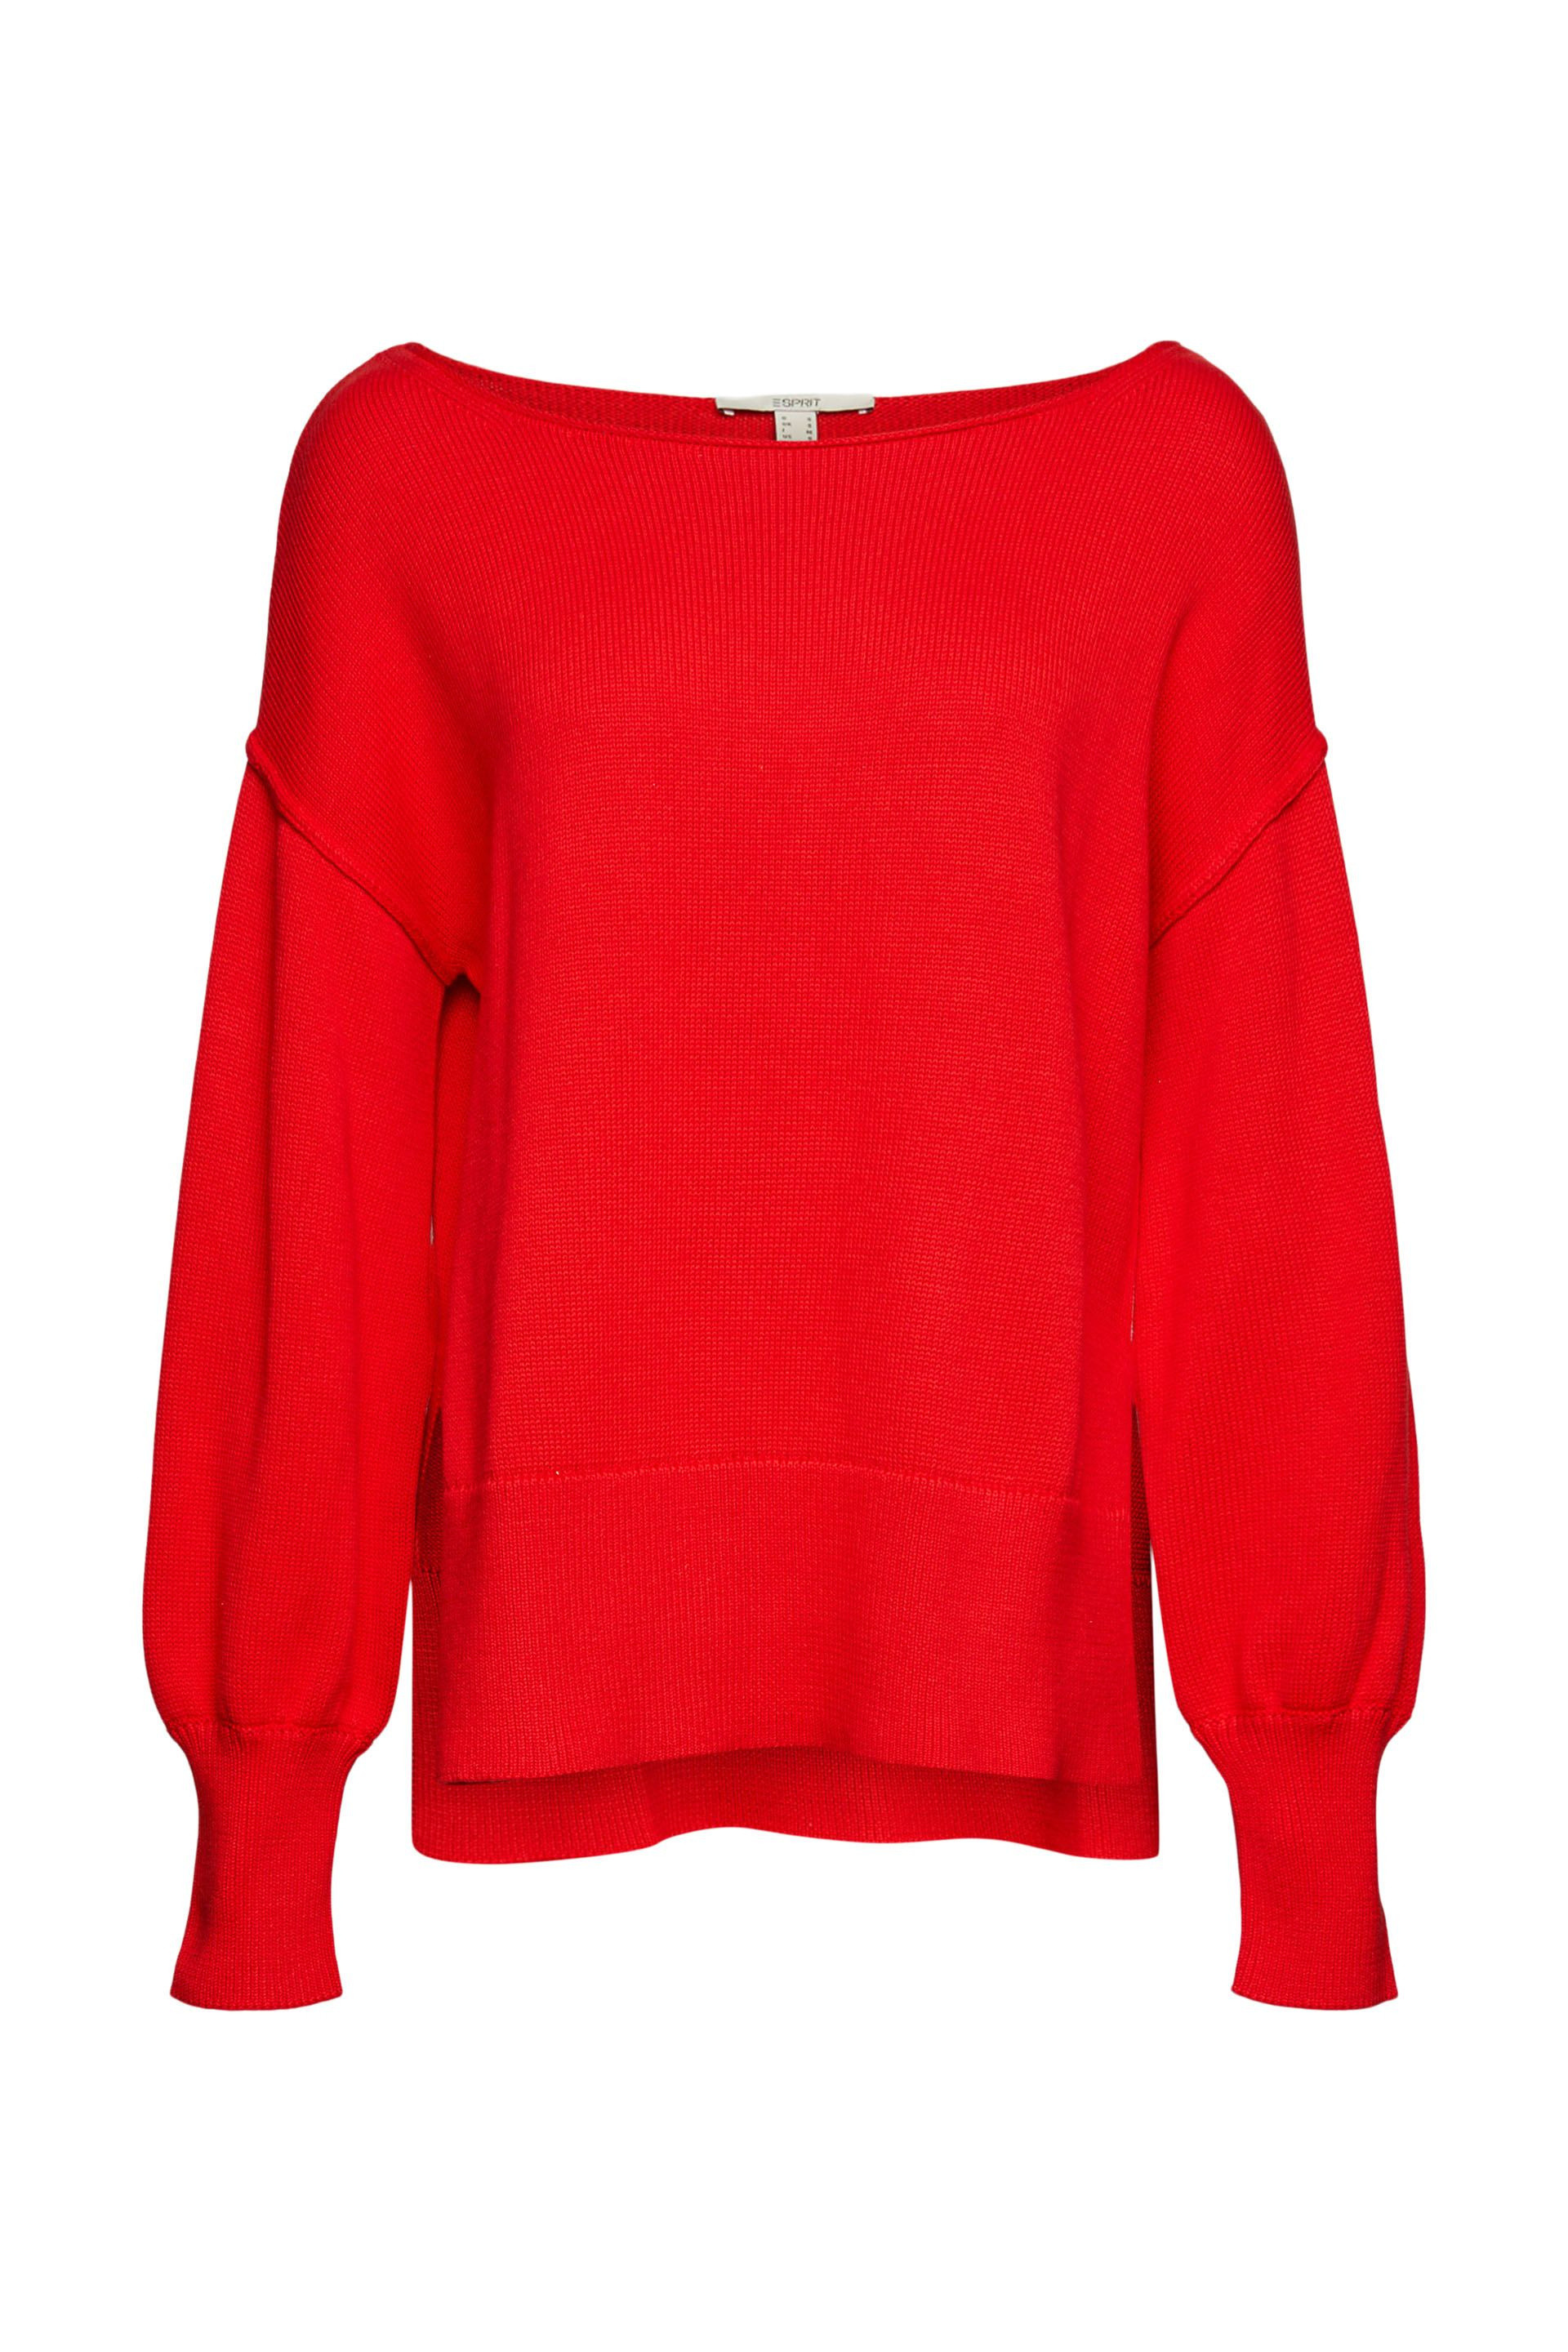 Pullover a maglia con spacchi, Rosso, large image number 0